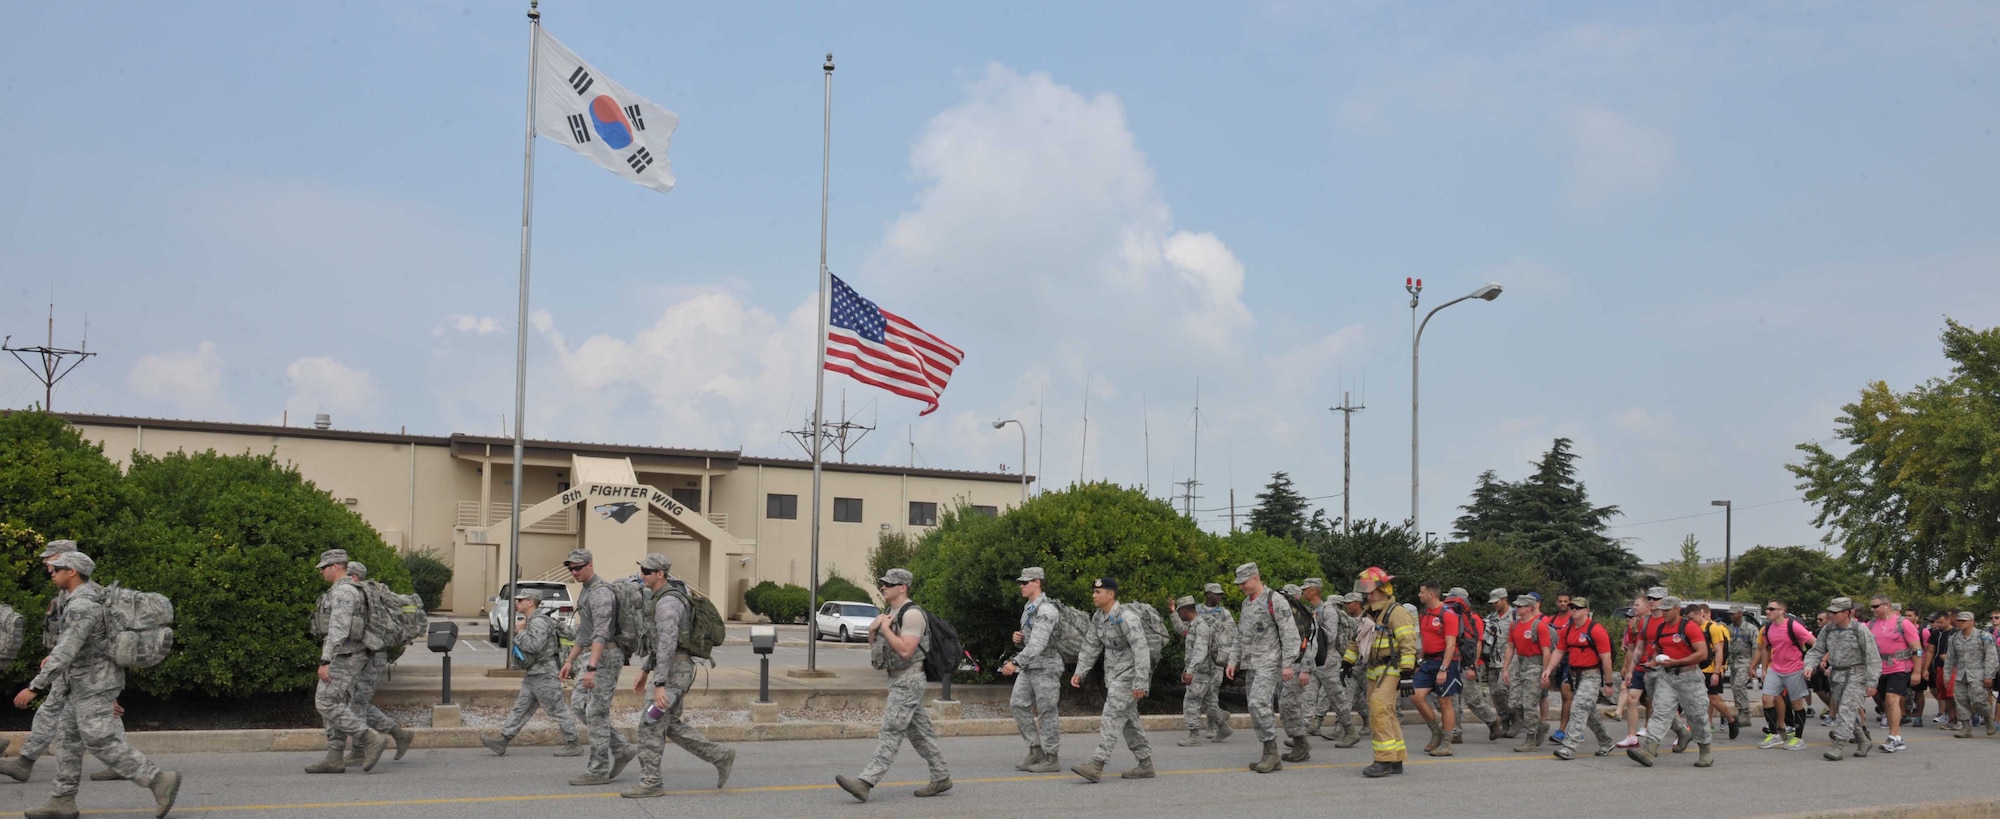 Members of the 8th Fighter Wing participate in a ruck march in remembrance of 9/11 at Kunsan Air Base, South Korea, Sept. 11, 2015. Airmen participated in the ruck march to honor those that gave their lives Sept. 11, 2001. (U.S. Air Force photo/Senior Airman Dustin King)